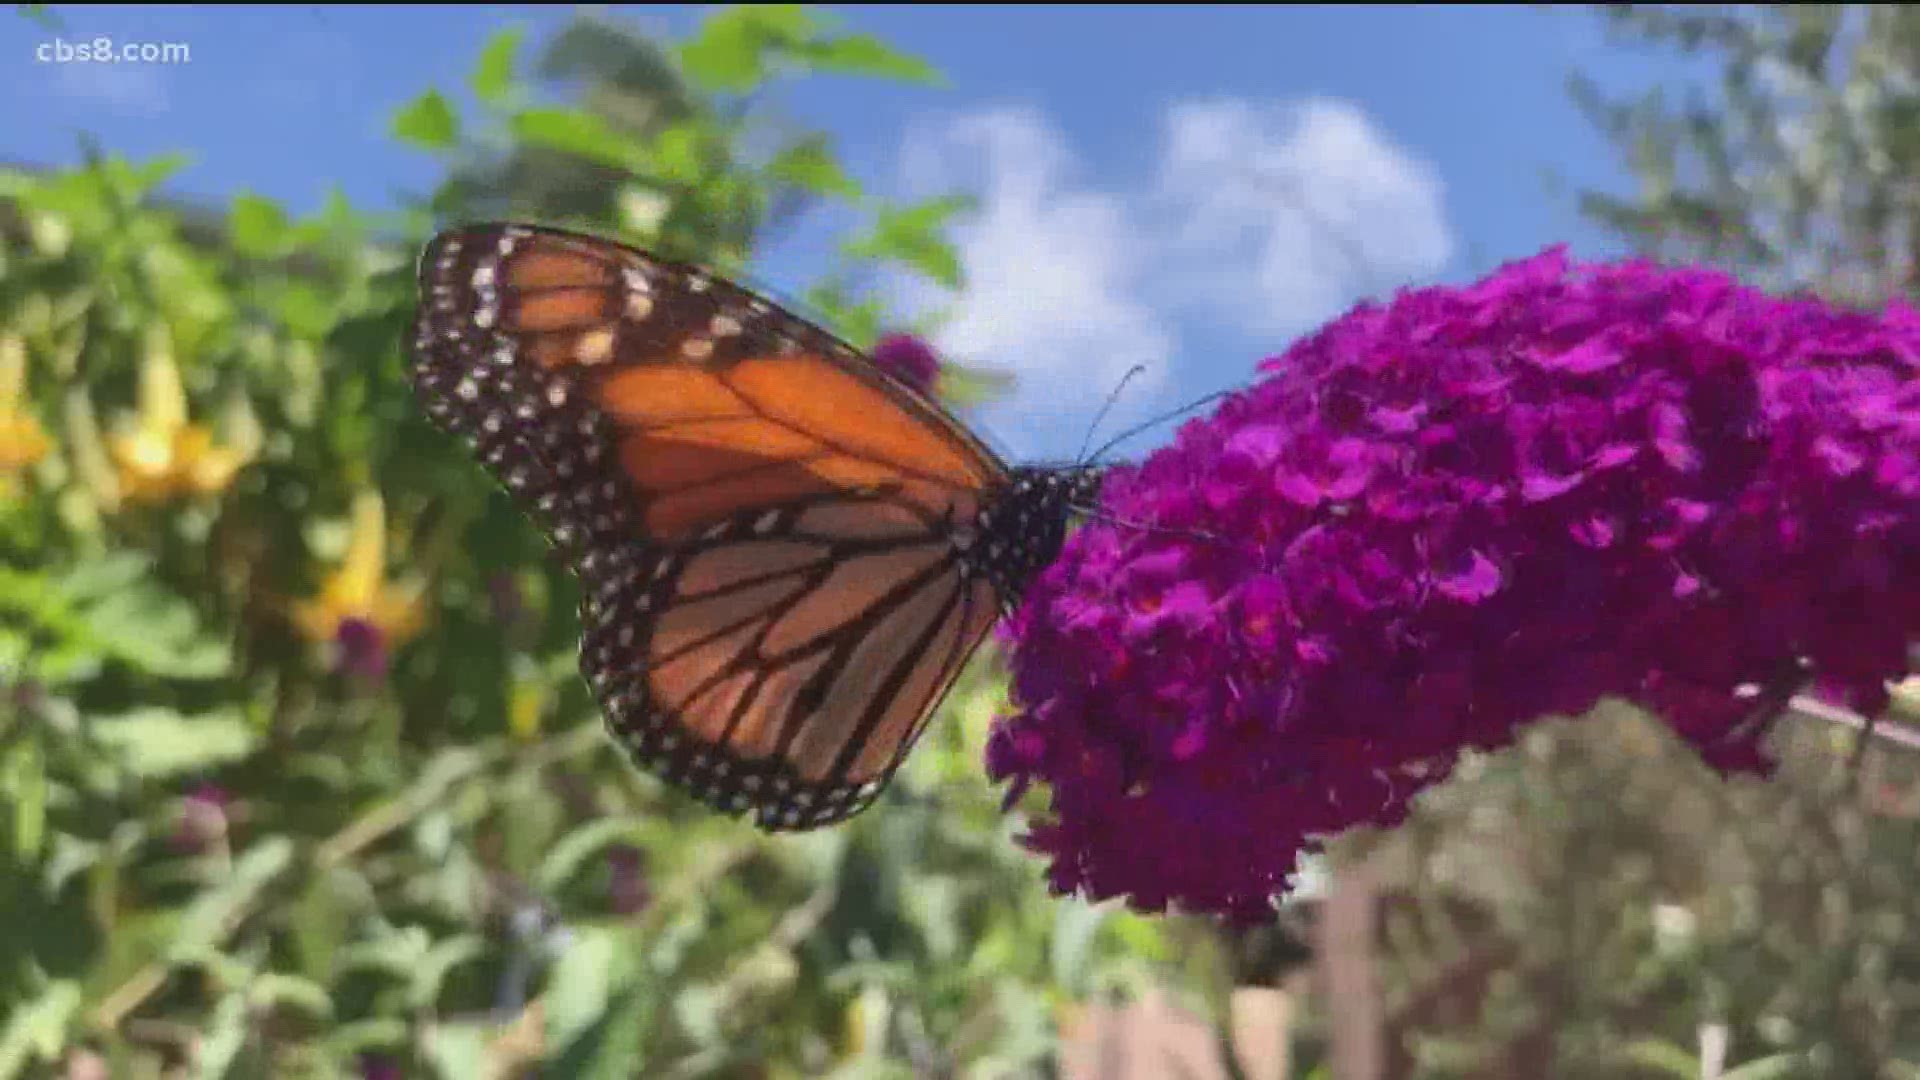 The total time from egg to butterfly is about 30 days so be sure to have food for the Monarchs.